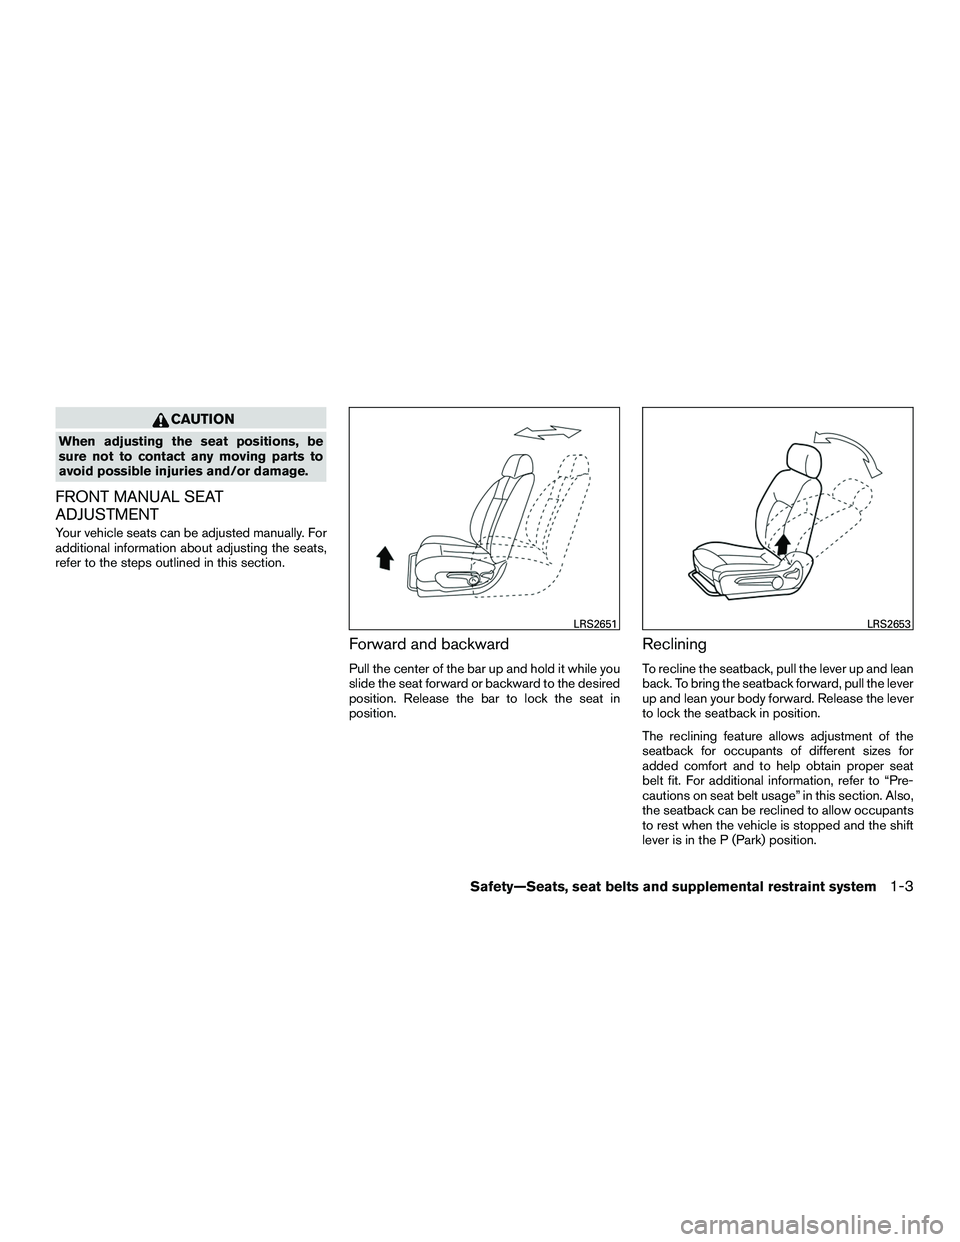 NISSAN NV200 2016 Owners Manual CAUTION
When adjusting the seat positions, be
sure not to contact any moving parts to
avoid possible injuries and/or damage.
FRONT MANUAL SEAT
ADJUSTMENT
Your vehicle seats can be adjusted manually. F